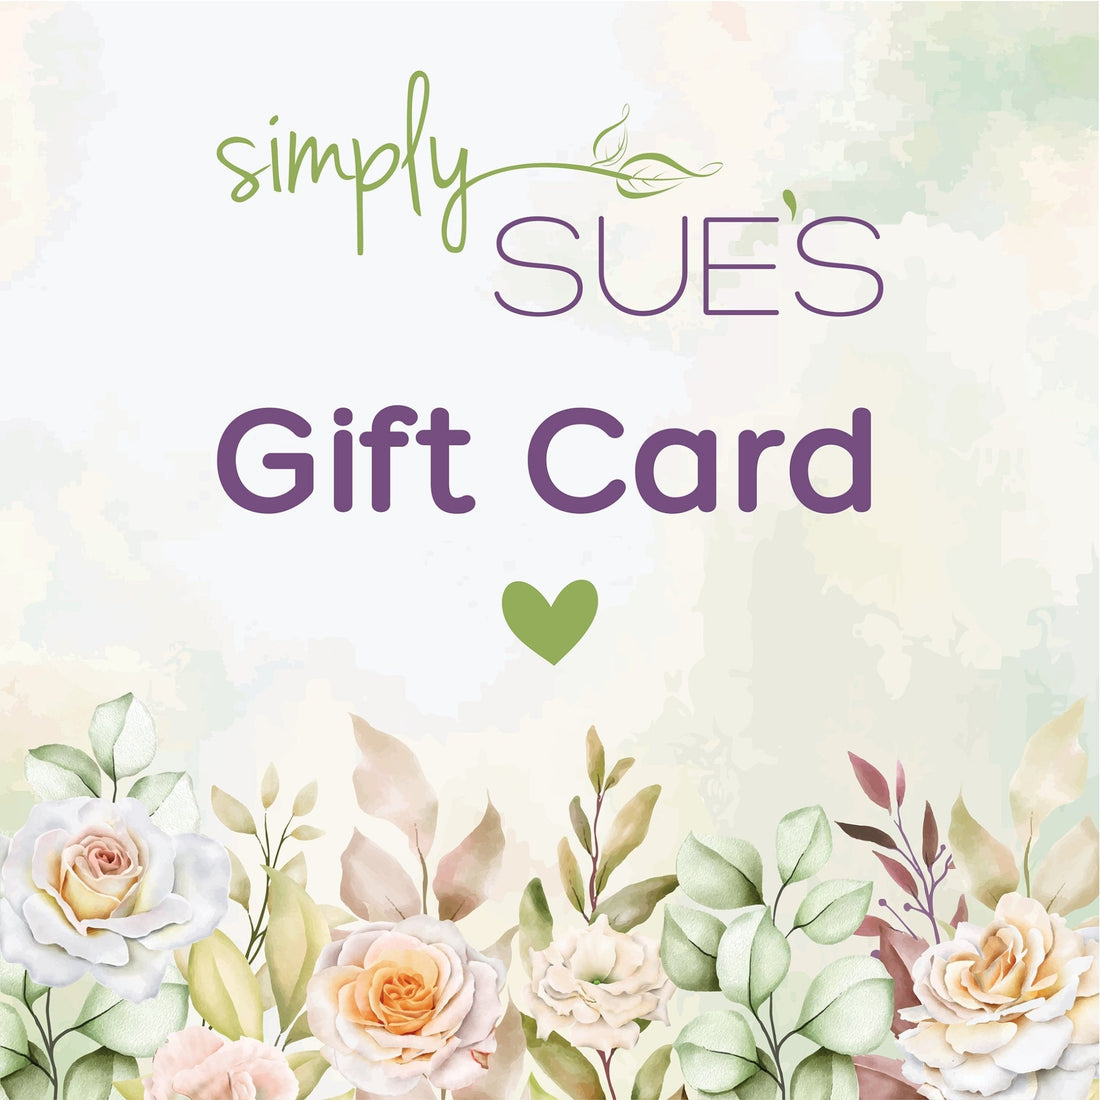 A floral digital gift card for Simply Sue&